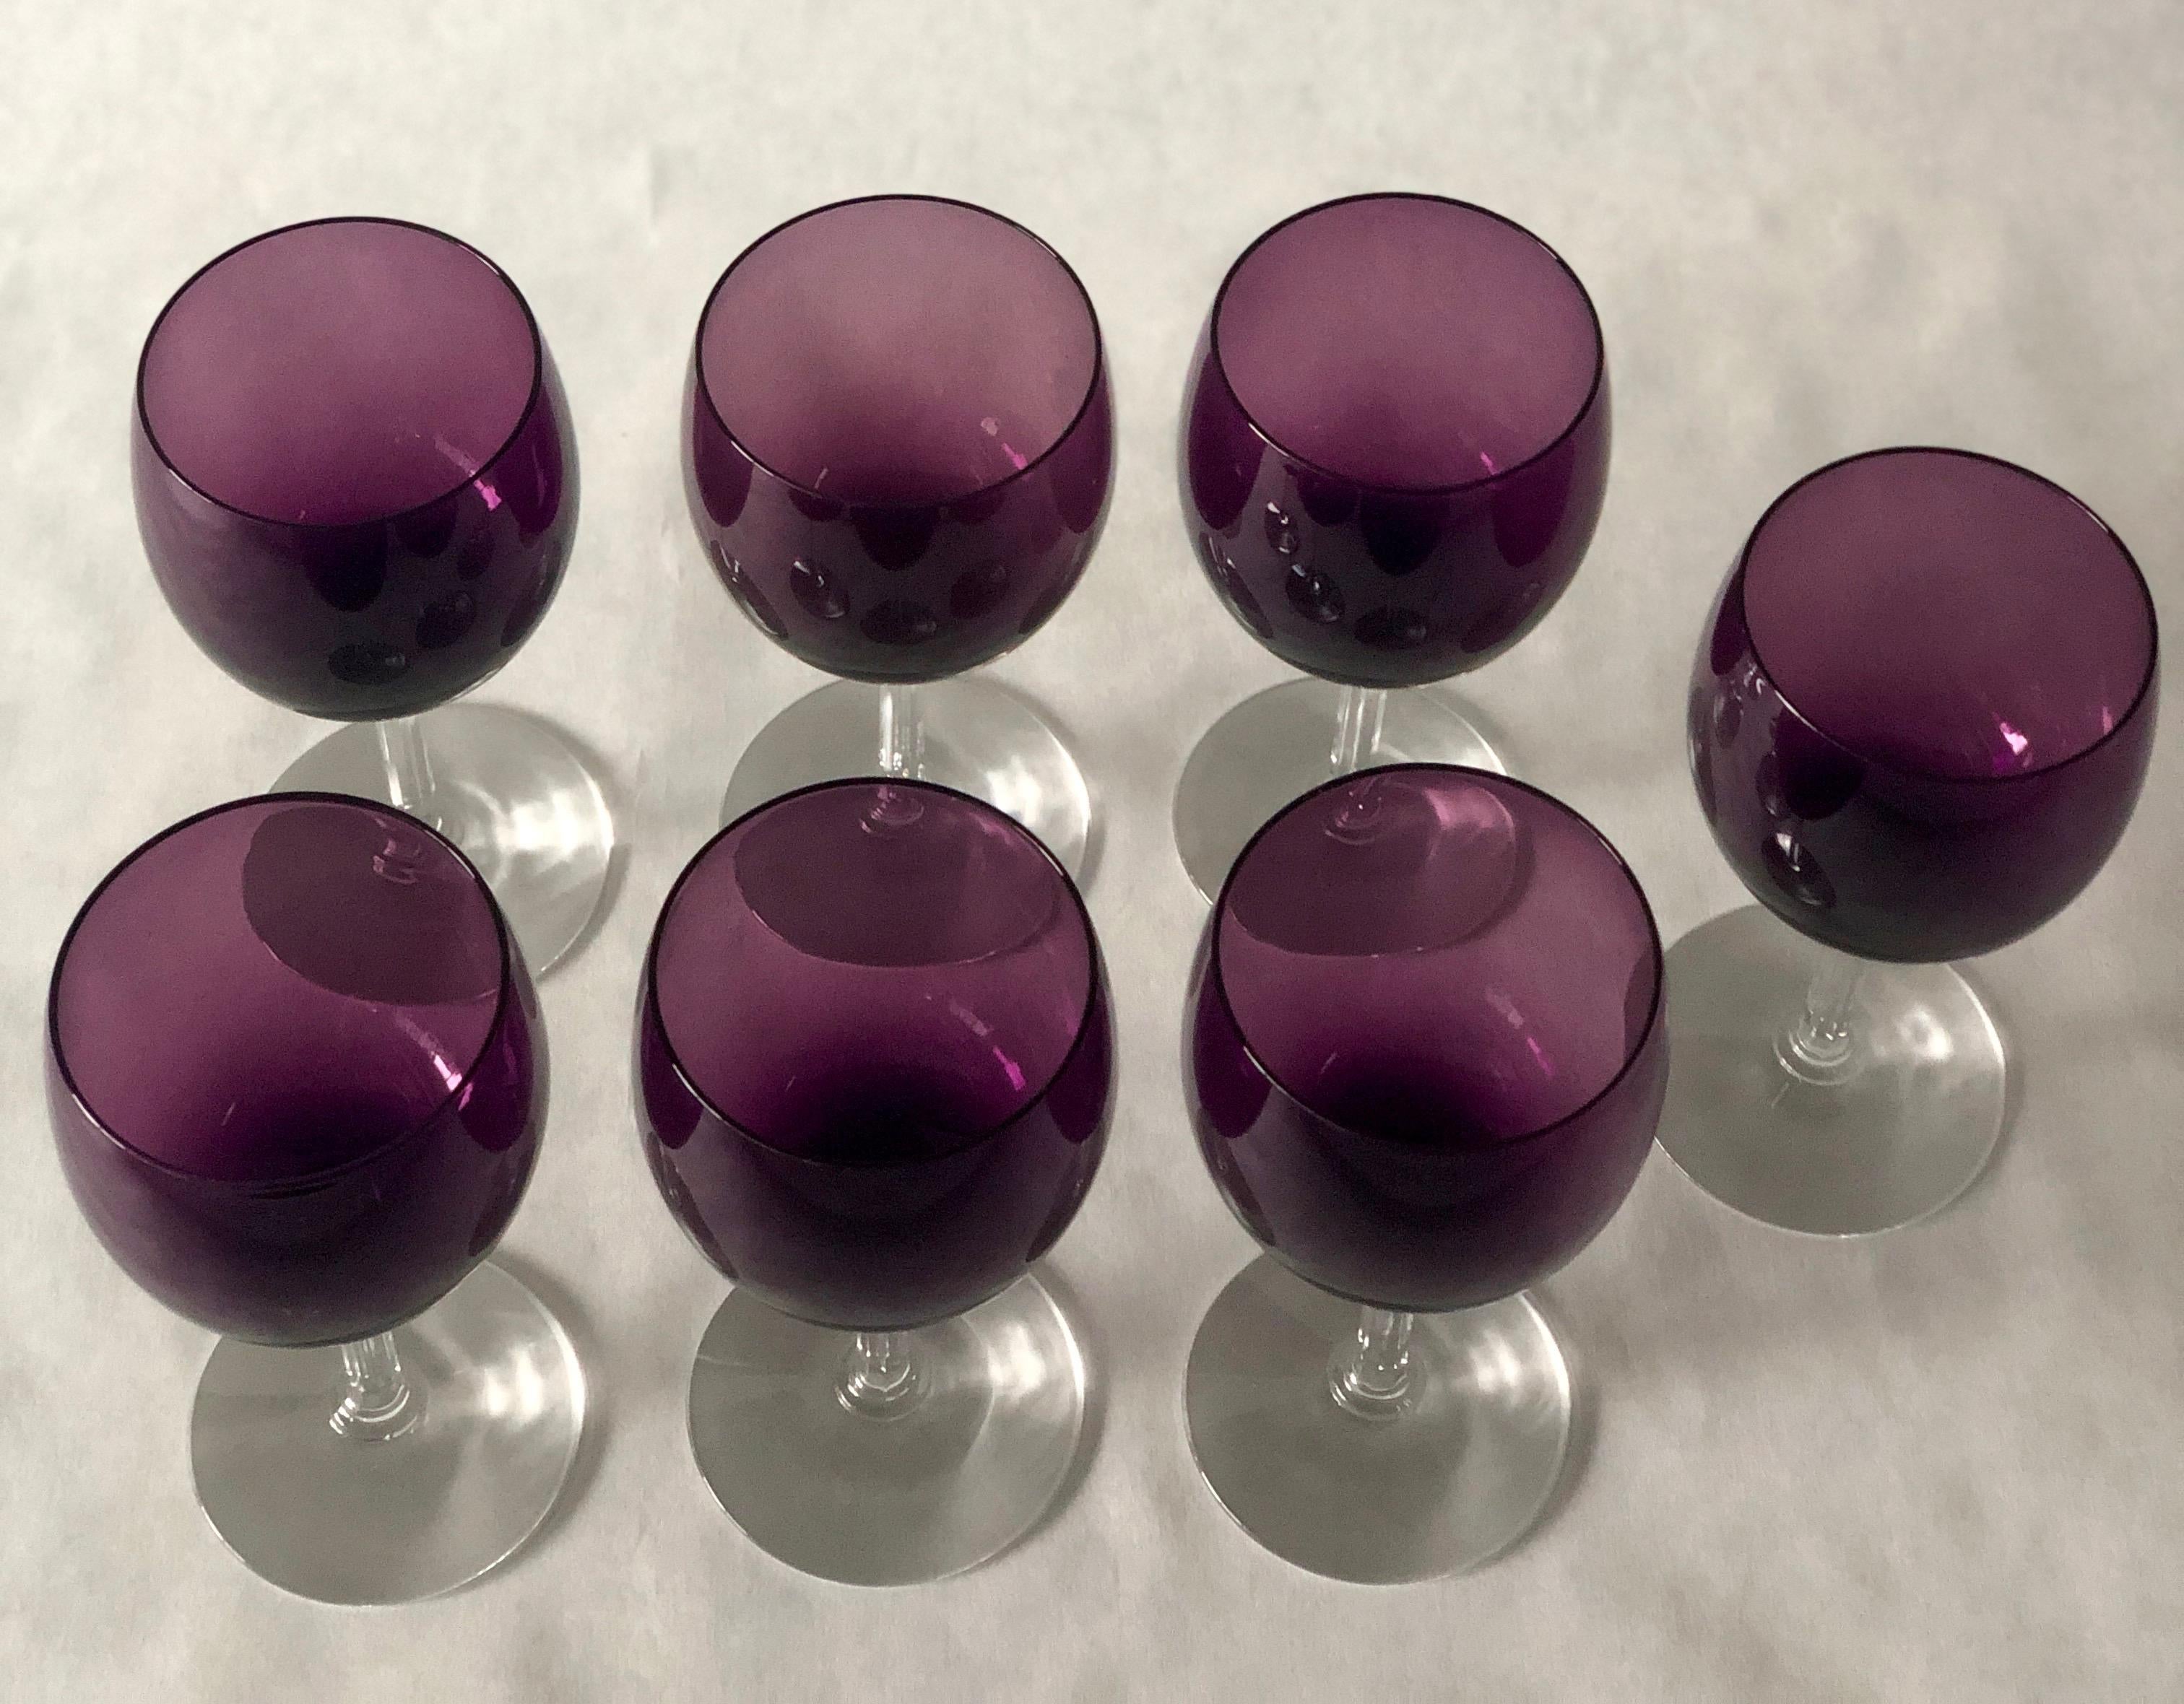 Offered is a set of seven crystal wine or water goblets / glasses in a beautiful deep purple shade and clear stem by Fostoria. This set of barware/ crystal goblets in deep purple and clear gleaming crystal would be perfect for holiday entertaining